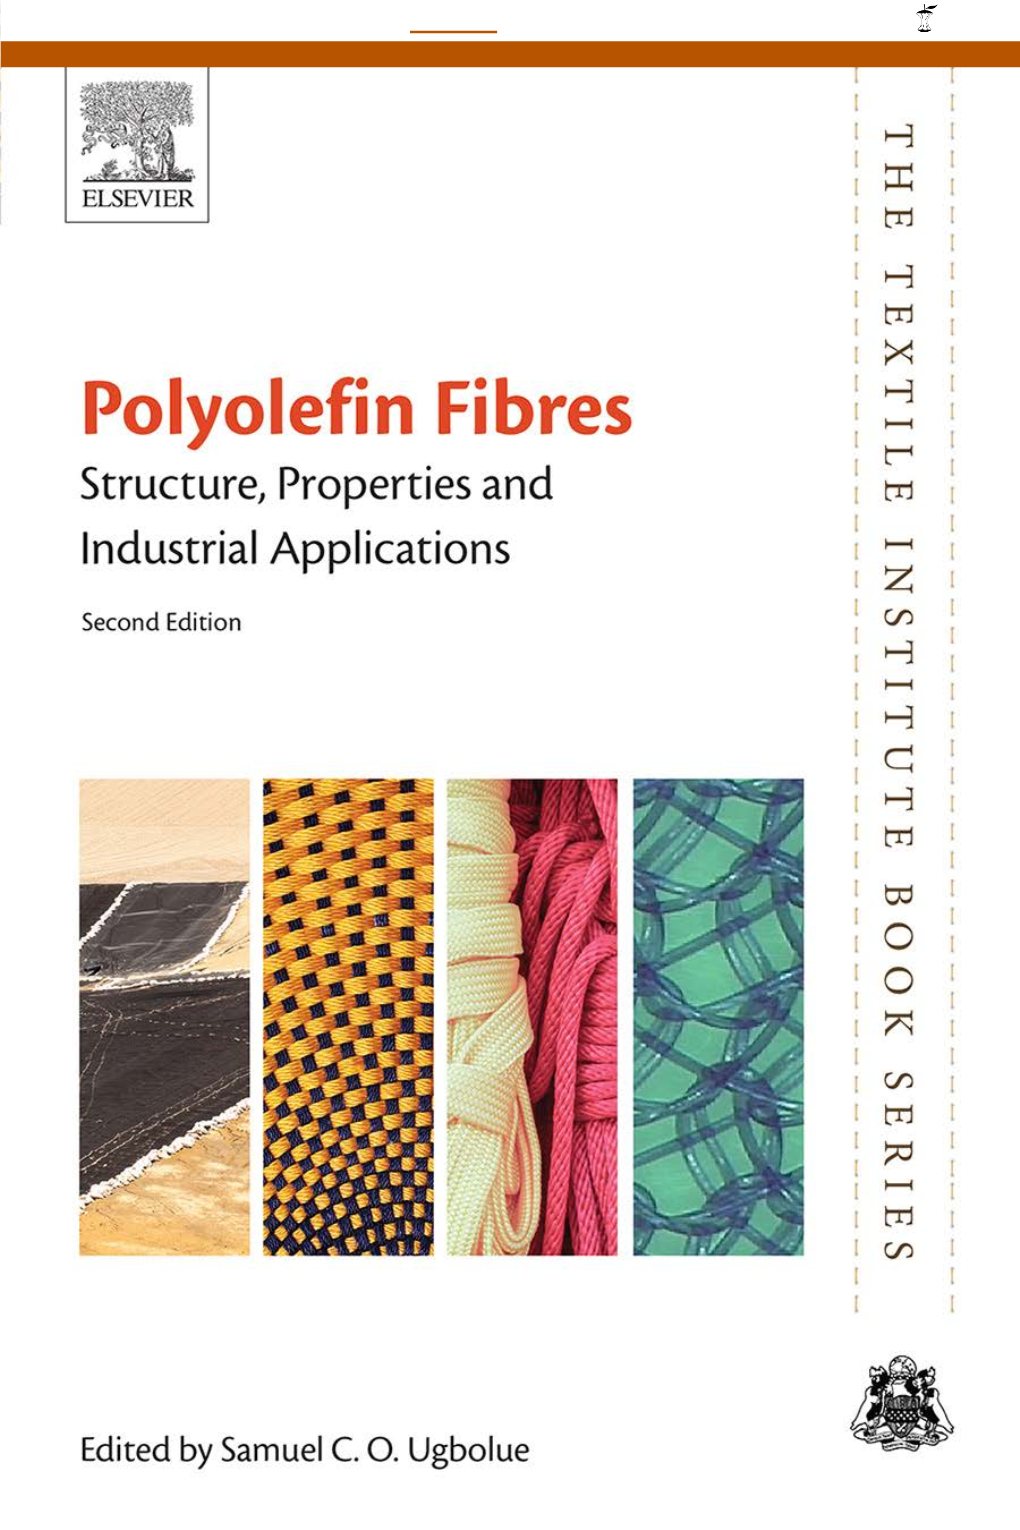 Polyolefin Fibres ~ Structure, Properties and [ Tr:1 Industrial Applications I Z Second Edition (/) ~